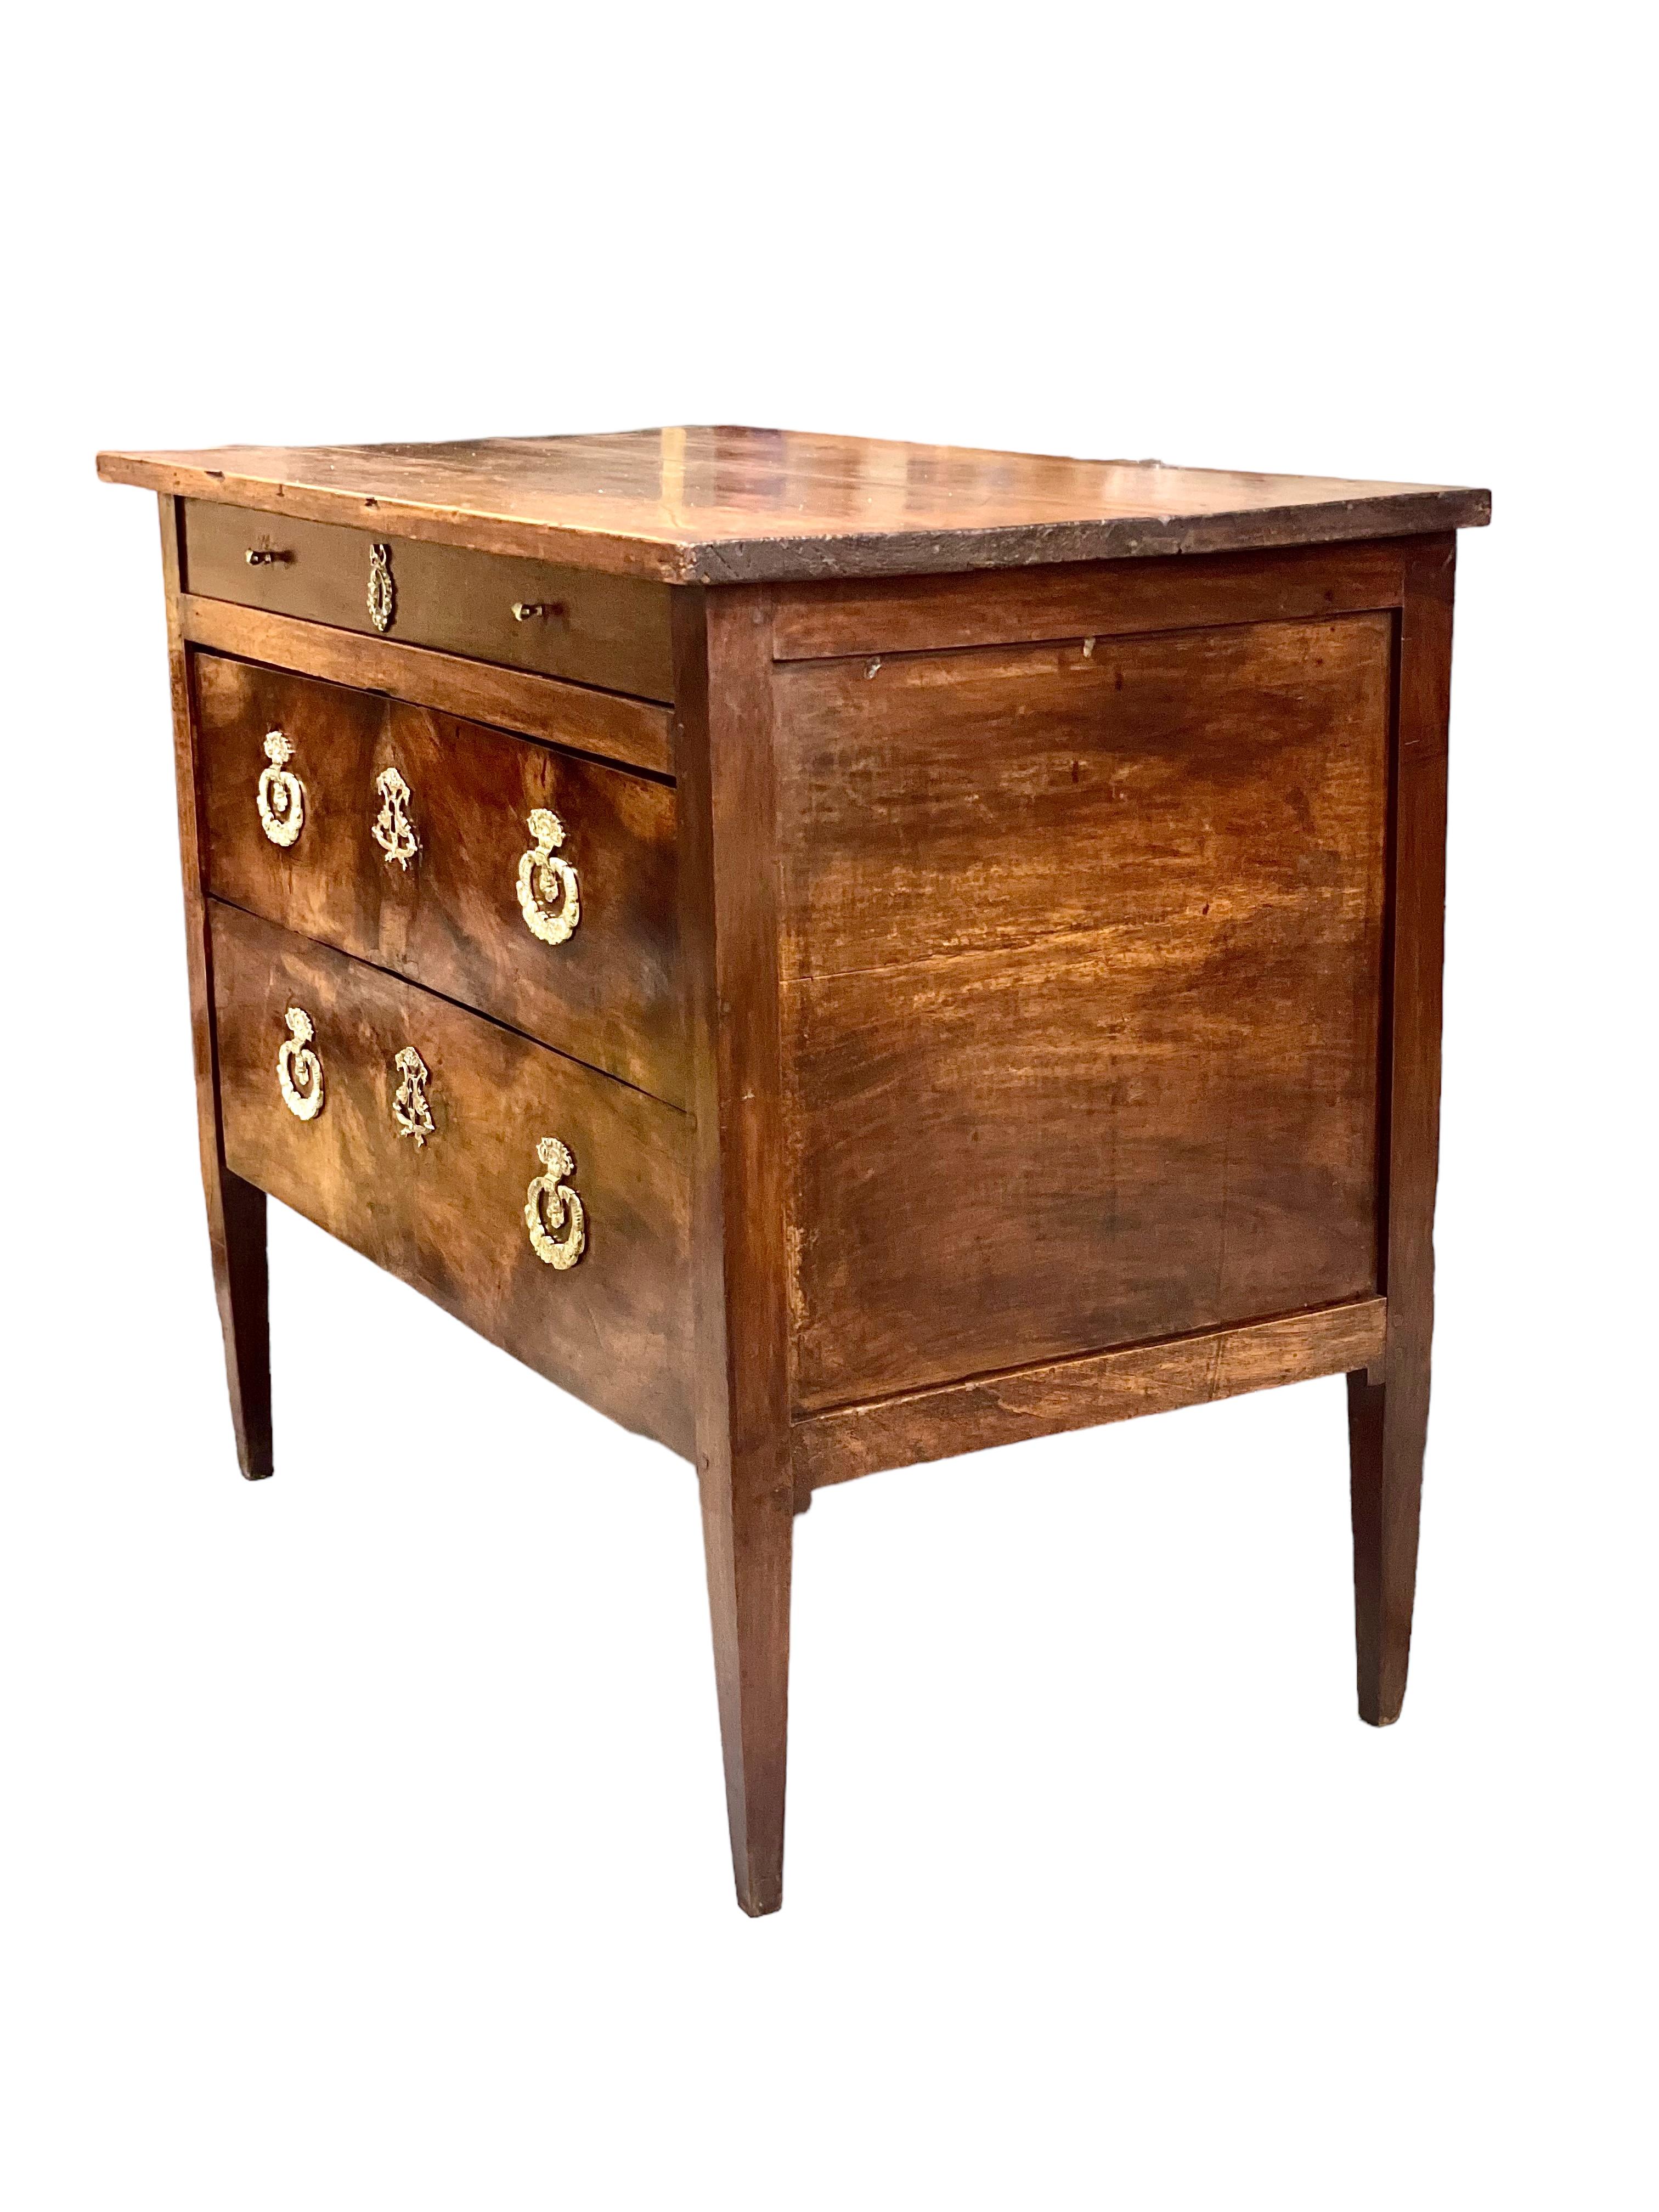 A simple and elegant 19th century commode, finished in beautiful wood veneer. Opening with two deep and wide drawers below a shallower one, its proportions make it an ideal piece for storage of important paperwork or maps. This handsome chest rests